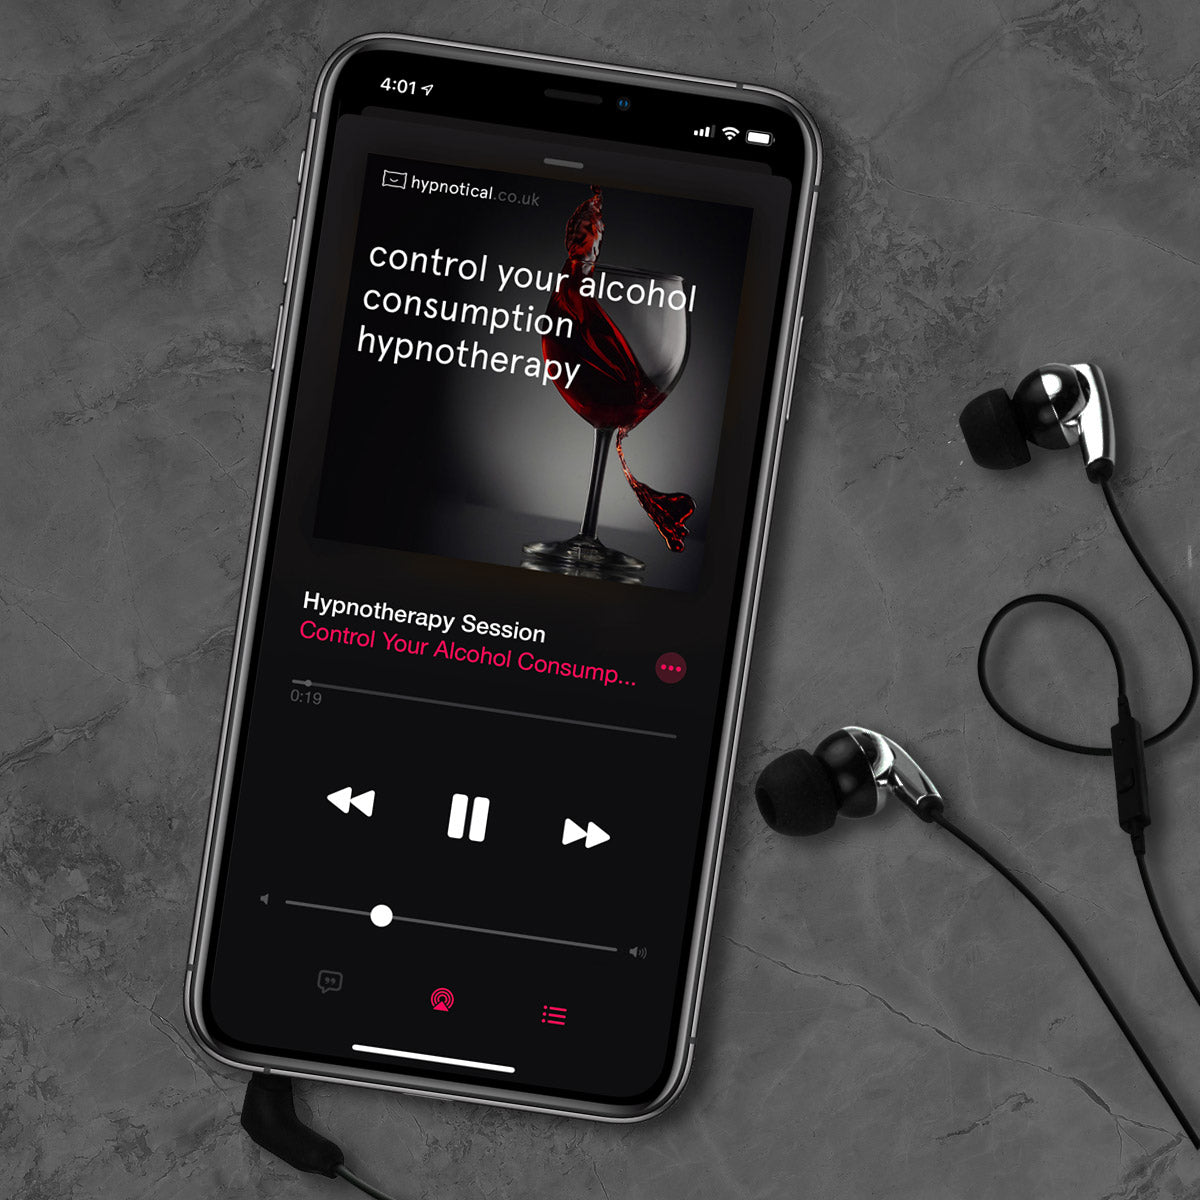 Listen to a Control Your Alcohol Consumption self-hypnosis session on your phone, tablet or computer.